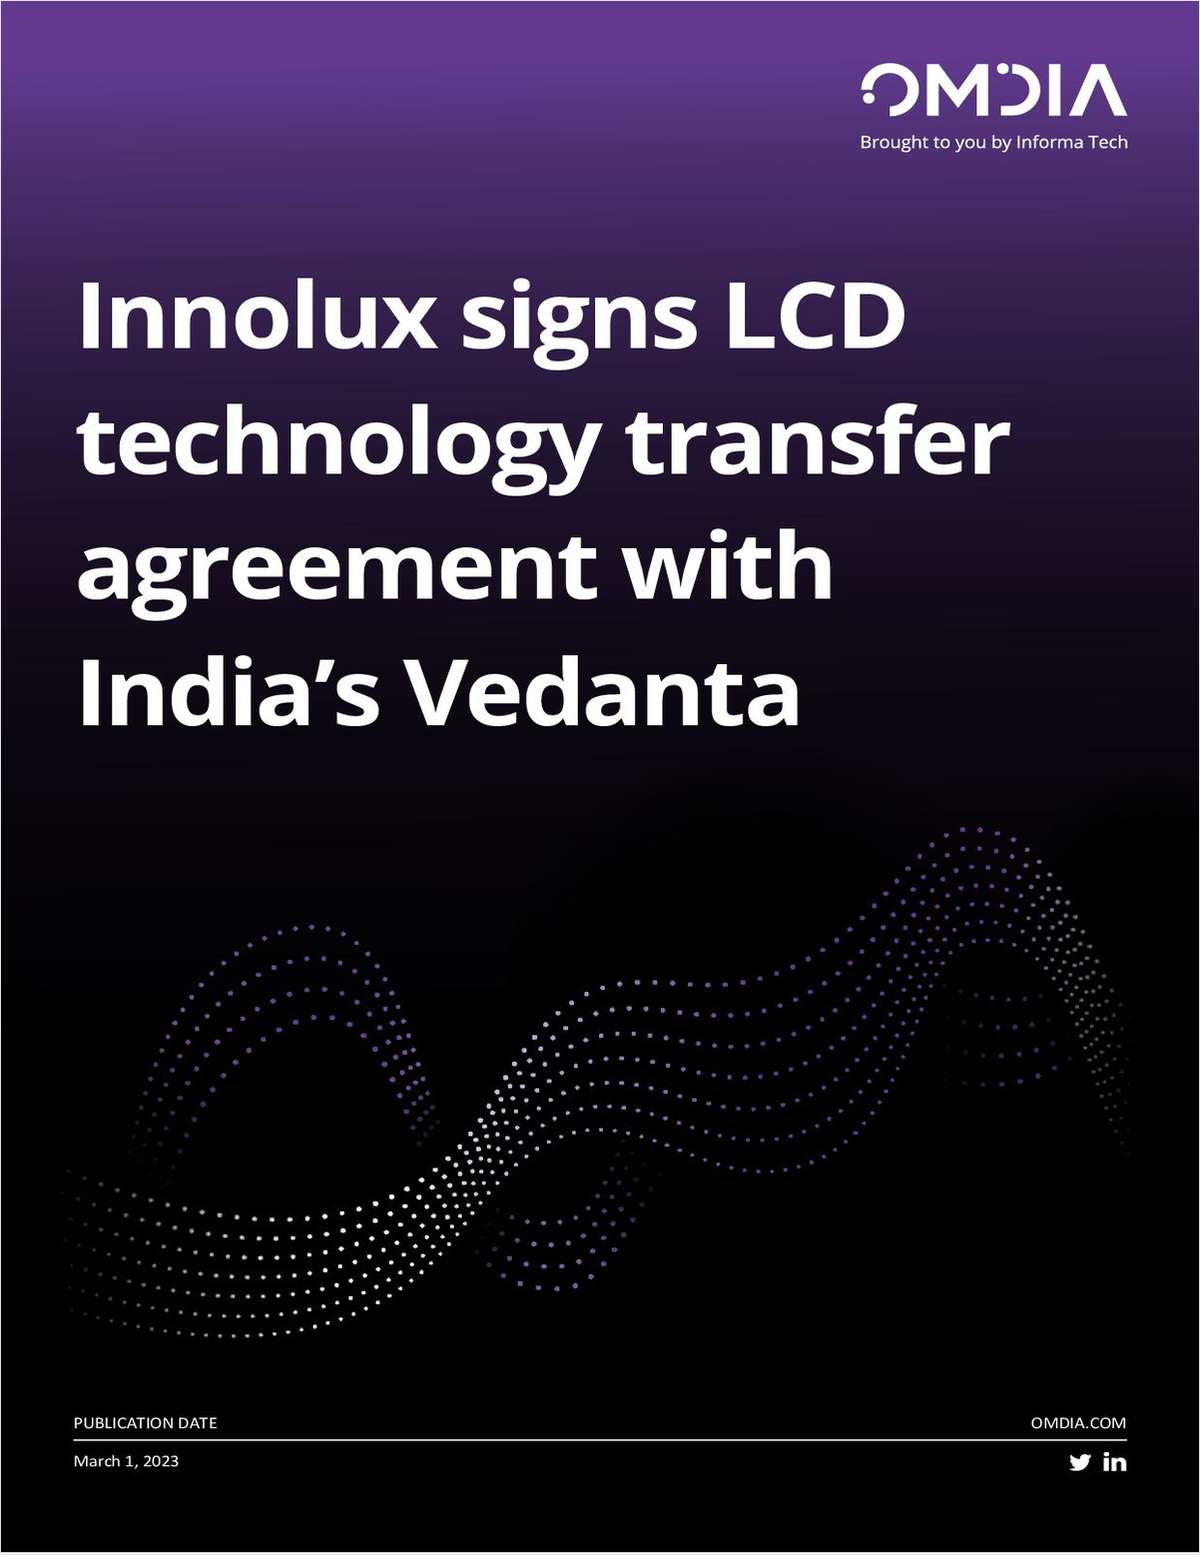 Innolux signs LCD technology transfer agreement with India's Vedanta